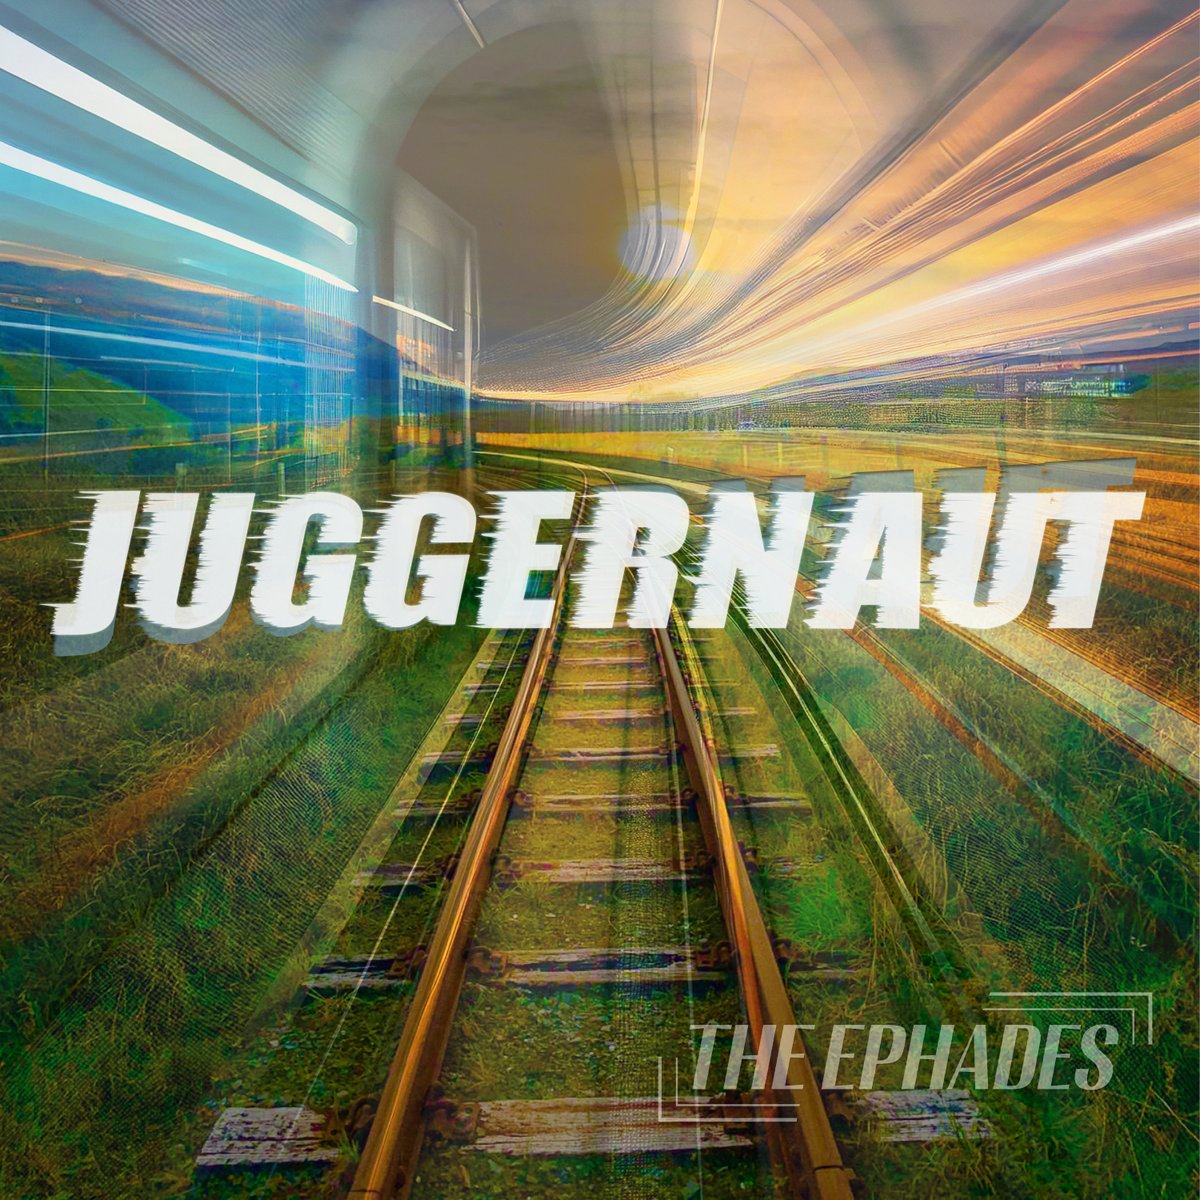 Yes lads! We are so excited to announce our brand new single Juggernaut that will be released this Friday the 1st of December! Big thanks to the boys in Egghouse Studios for producing the track. You can save it from the link below! show.co/vkH5iel